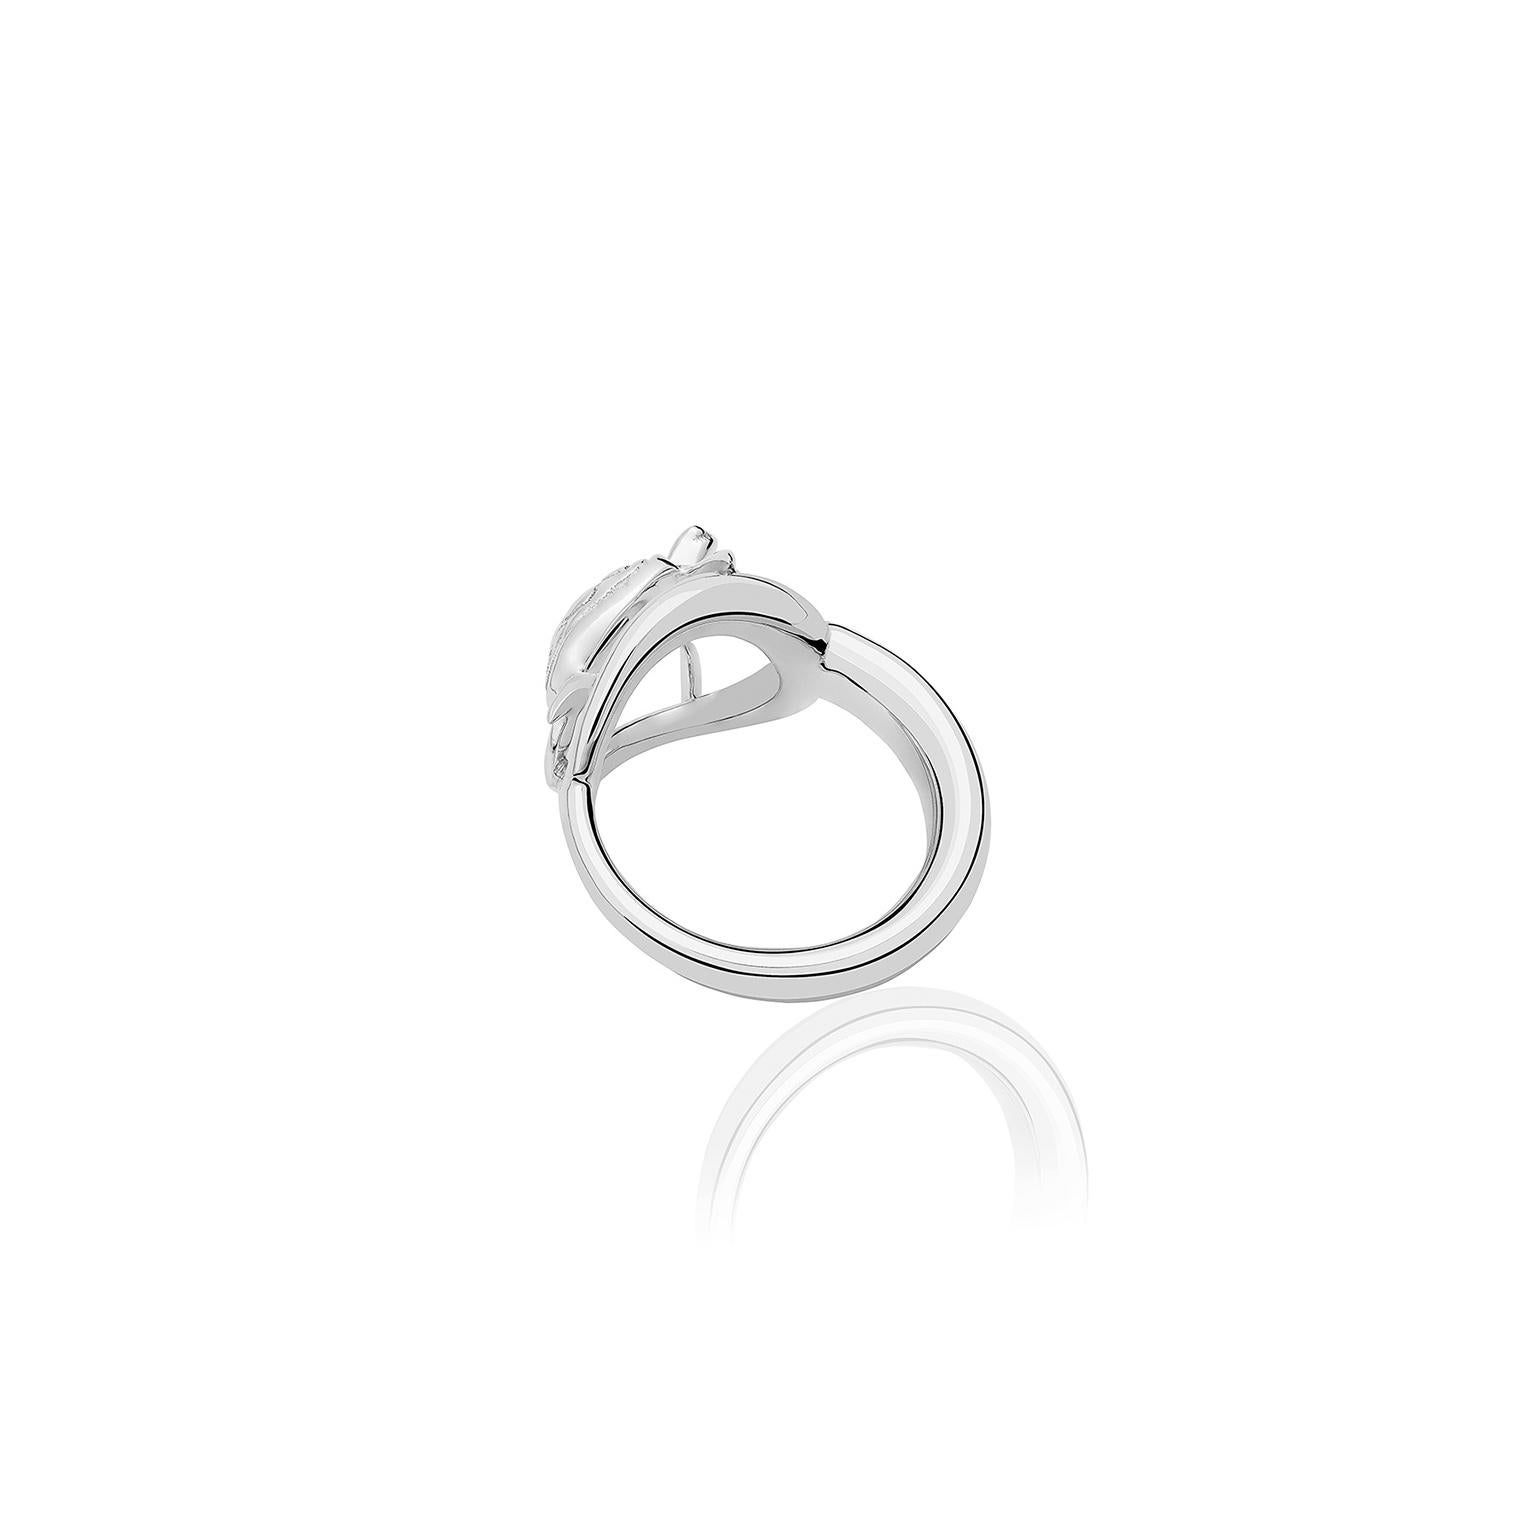 The Turtle Ring from the Animals Collection by TANE is made in silver .925. In it´s upper part, there is an irregular link designed for the collection inspired by nature. In it´s center is held a Turtle, the protagonist of the piece that decorates